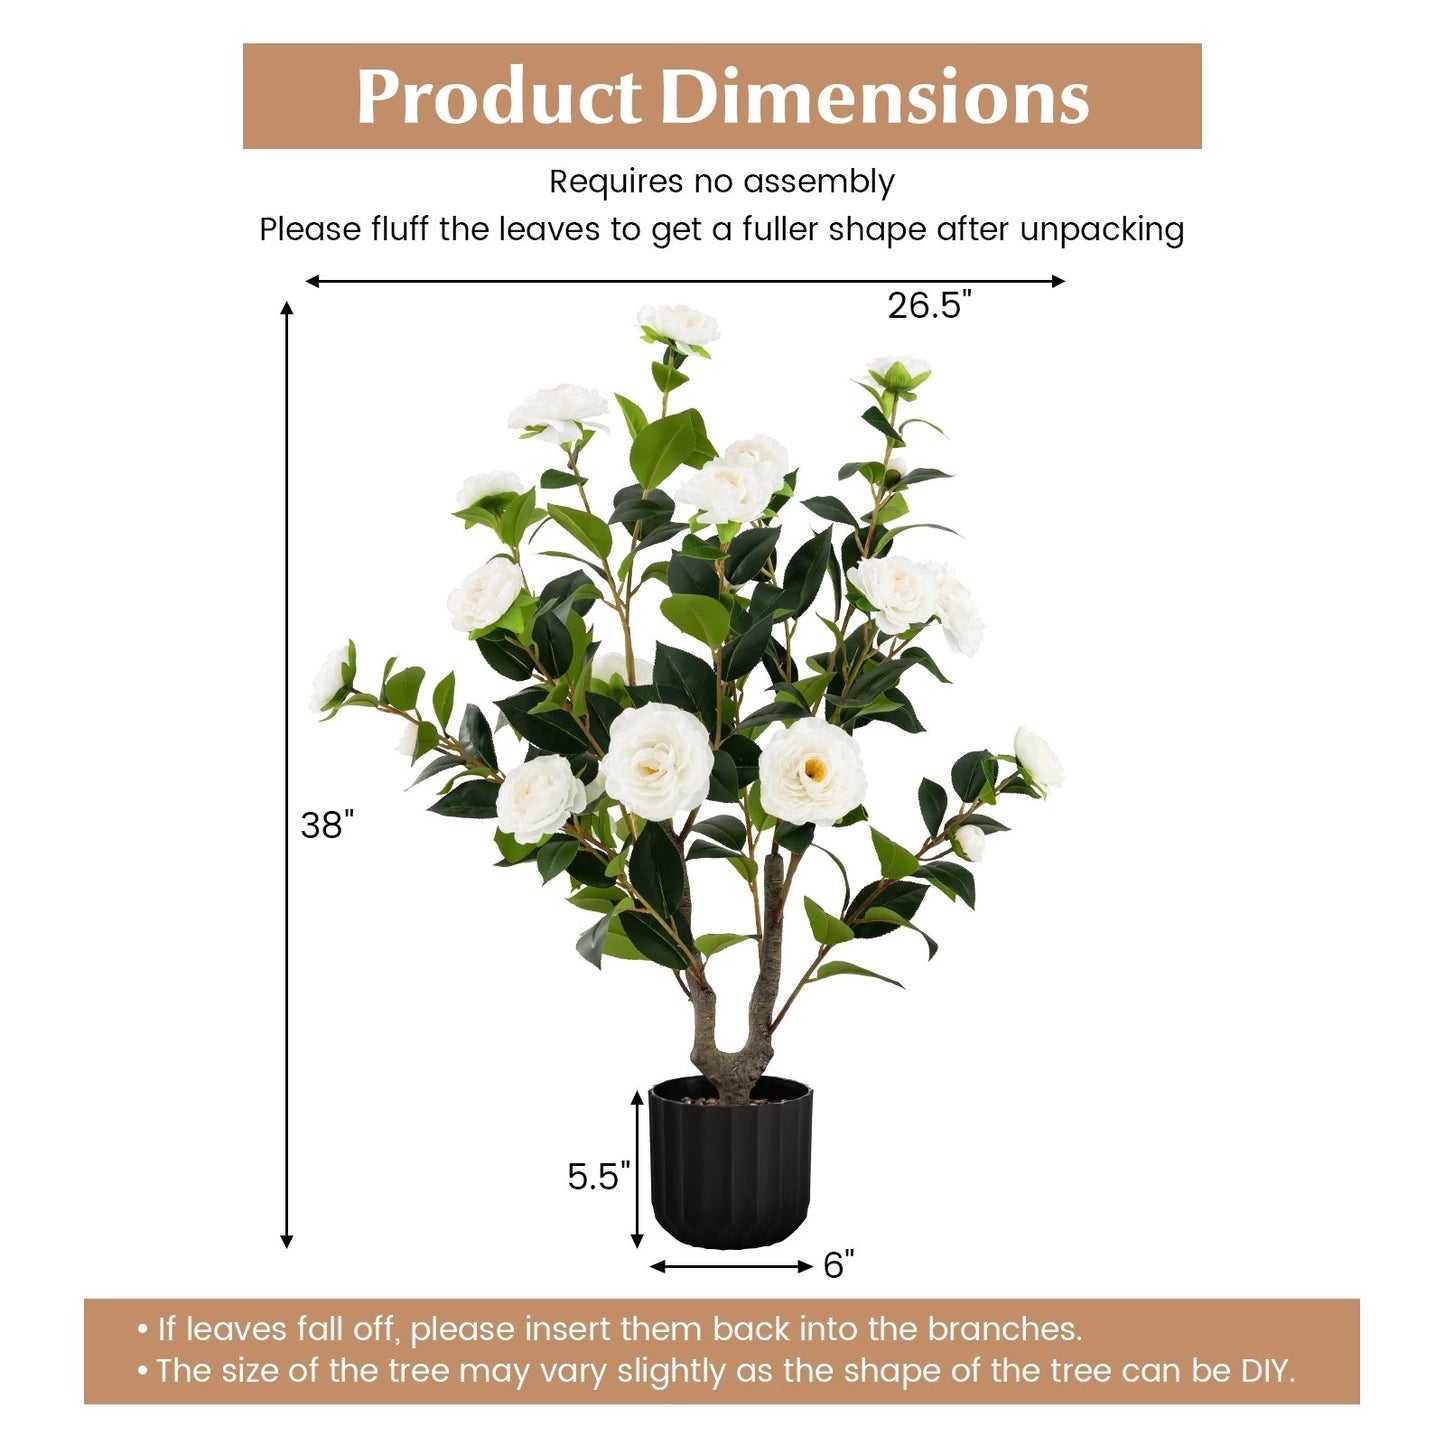 38 Inch Artificial Camellia Tree Faux Flower Plant in Cement Pot, White